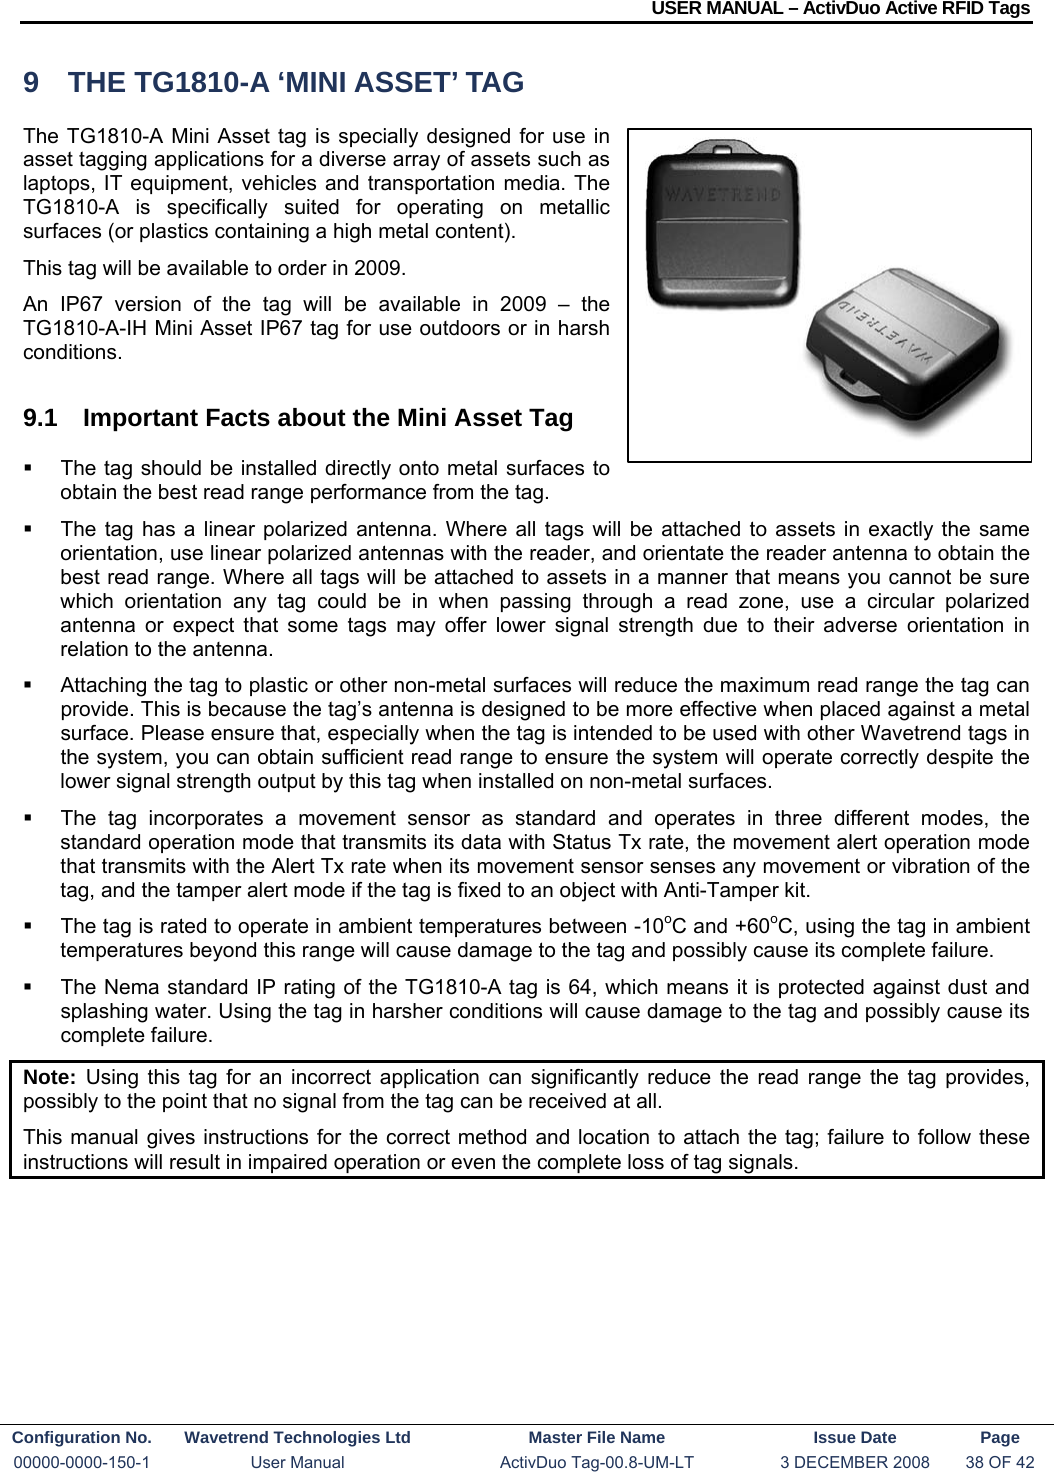 USER MANUAL – ActivDuo Active RFID Tags Configuration No.  Wavetrend Technologies Ltd  Master File Name   Issue Date  Page 00000-0000-150-1  User Manual  ActivDuo Tag-00.8-UM-LT  3 DECEMBER 2008  38 OF 42  9  THE TG1810-A ‘MINI ASSET’ TAG The TG1810-A Mini Asset tag is specially designed for use in asset tagging applications for a diverse array of assets such as laptops, IT equipment, vehicles and transportation media. The TG1810-A is specifically suited for operating on metallic surfaces (or plastics containing a high metal content). This tag will be available to order in 2009. An IP67 version of the tag will be available in 2009 – the TG1810-A-IH Mini Asset IP67 tag for use outdoors or in harsh conditions. 9.1  Important Facts about the Mini Asset Tag   The tag should be installed directly onto metal surfaces to obtain the best read range performance from the tag.    The tag has a linear polarized antenna. Where all tags will be attached to assets in exactly the same orientation, use linear polarized antennas with the reader, and orientate the reader antenna to obtain the best read range. Where all tags will be attached to assets in a manner that means you cannot be sure which orientation any tag could be in when passing through a read zone, use a circular polarized antenna or expect that some tags may offer lower signal strength due to their adverse orientation in relation to the antenna.   Attaching the tag to plastic or other non-metal surfaces will reduce the maximum read range the tag can provide. This is because the tag’s antenna is designed to be more effective when placed against a metal surface. Please ensure that, especially when the tag is intended to be used with other Wavetrend tags in the system, you can obtain sufficient read range to ensure the system will operate correctly despite the lower signal strength output by this tag when installed on non-metal surfaces.   The tag incorporates a movement sensor as standard and operates in three different modes, the standard operation mode that transmits its data with Status Tx rate, the movement alert operation mode that transmits with the Alert Tx rate when its movement sensor senses any movement or vibration of the tag, and the tamper alert mode if the tag is fixed to an object with Anti-Tamper kit.   The tag is rated to operate in ambient temperatures between -10oC and +60oC, using the tag in ambient temperatures beyond this range will cause damage to the tag and possibly cause its complete failure.   The Nema standard IP rating of the TG1810-A tag is 64, which means it is protected against dust and splashing water. Using the tag in harsher conditions will cause damage to the tag and possibly cause its complete failure. Note:  Using this tag for an incorrect application can significantly reduce the read range the tag provides, possibly to the point that no signal from the tag can be received at all. This manual gives instructions for the correct method and location to attach the tag; failure to follow these instructions will result in impaired operation or even the complete loss of tag signals.    